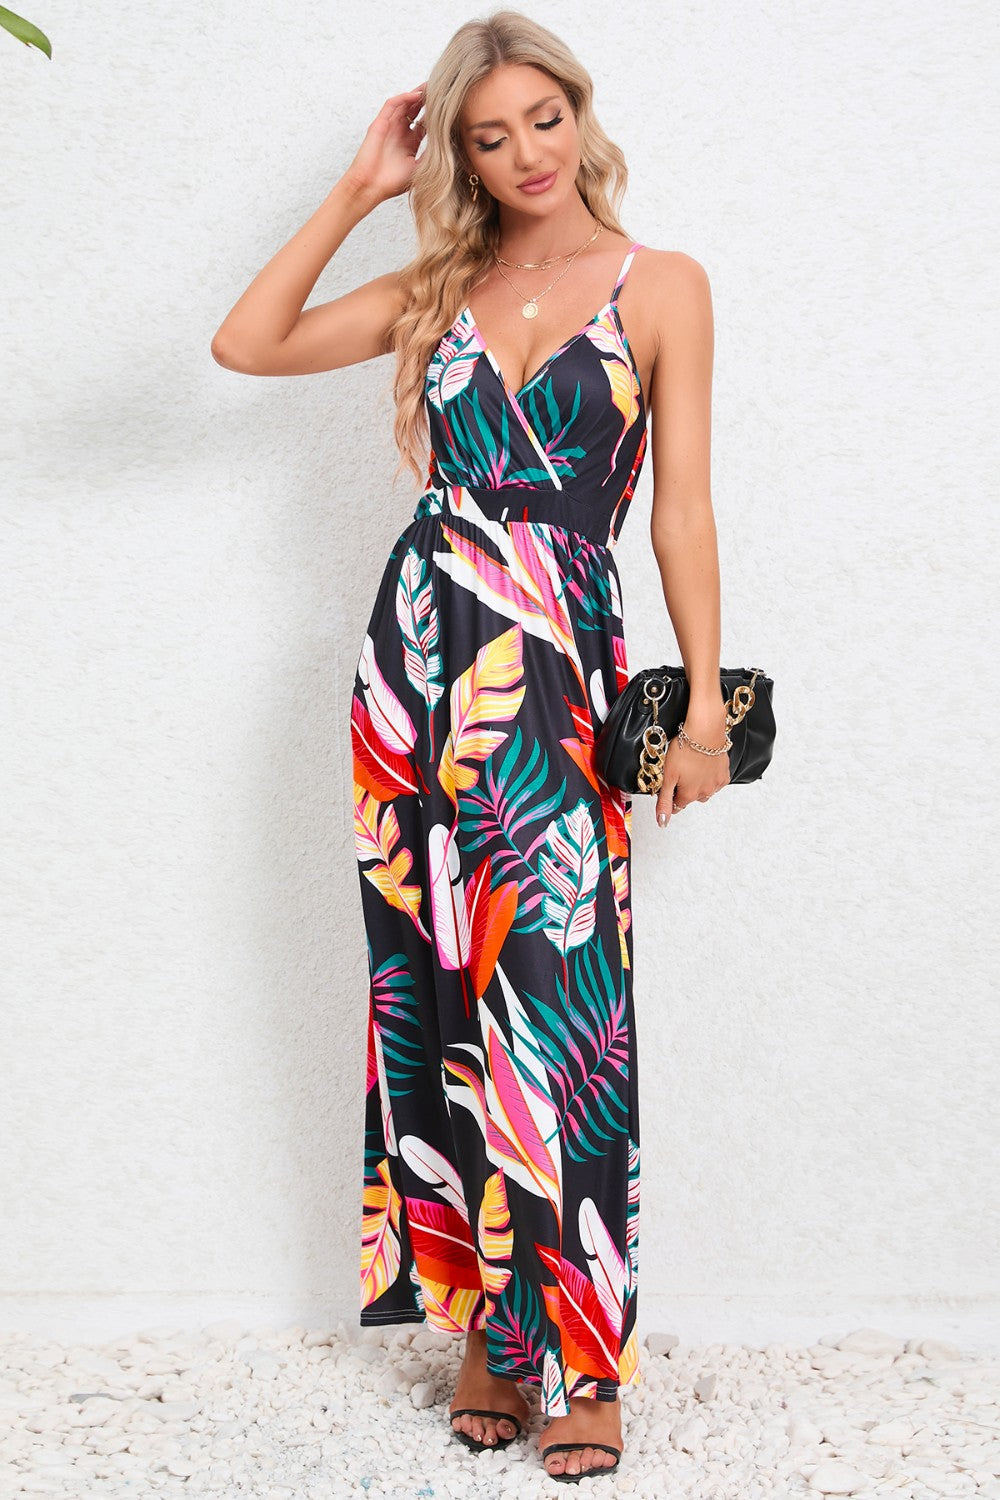 Printed Surplice Maxi Cami Dress [ click for additional color options]